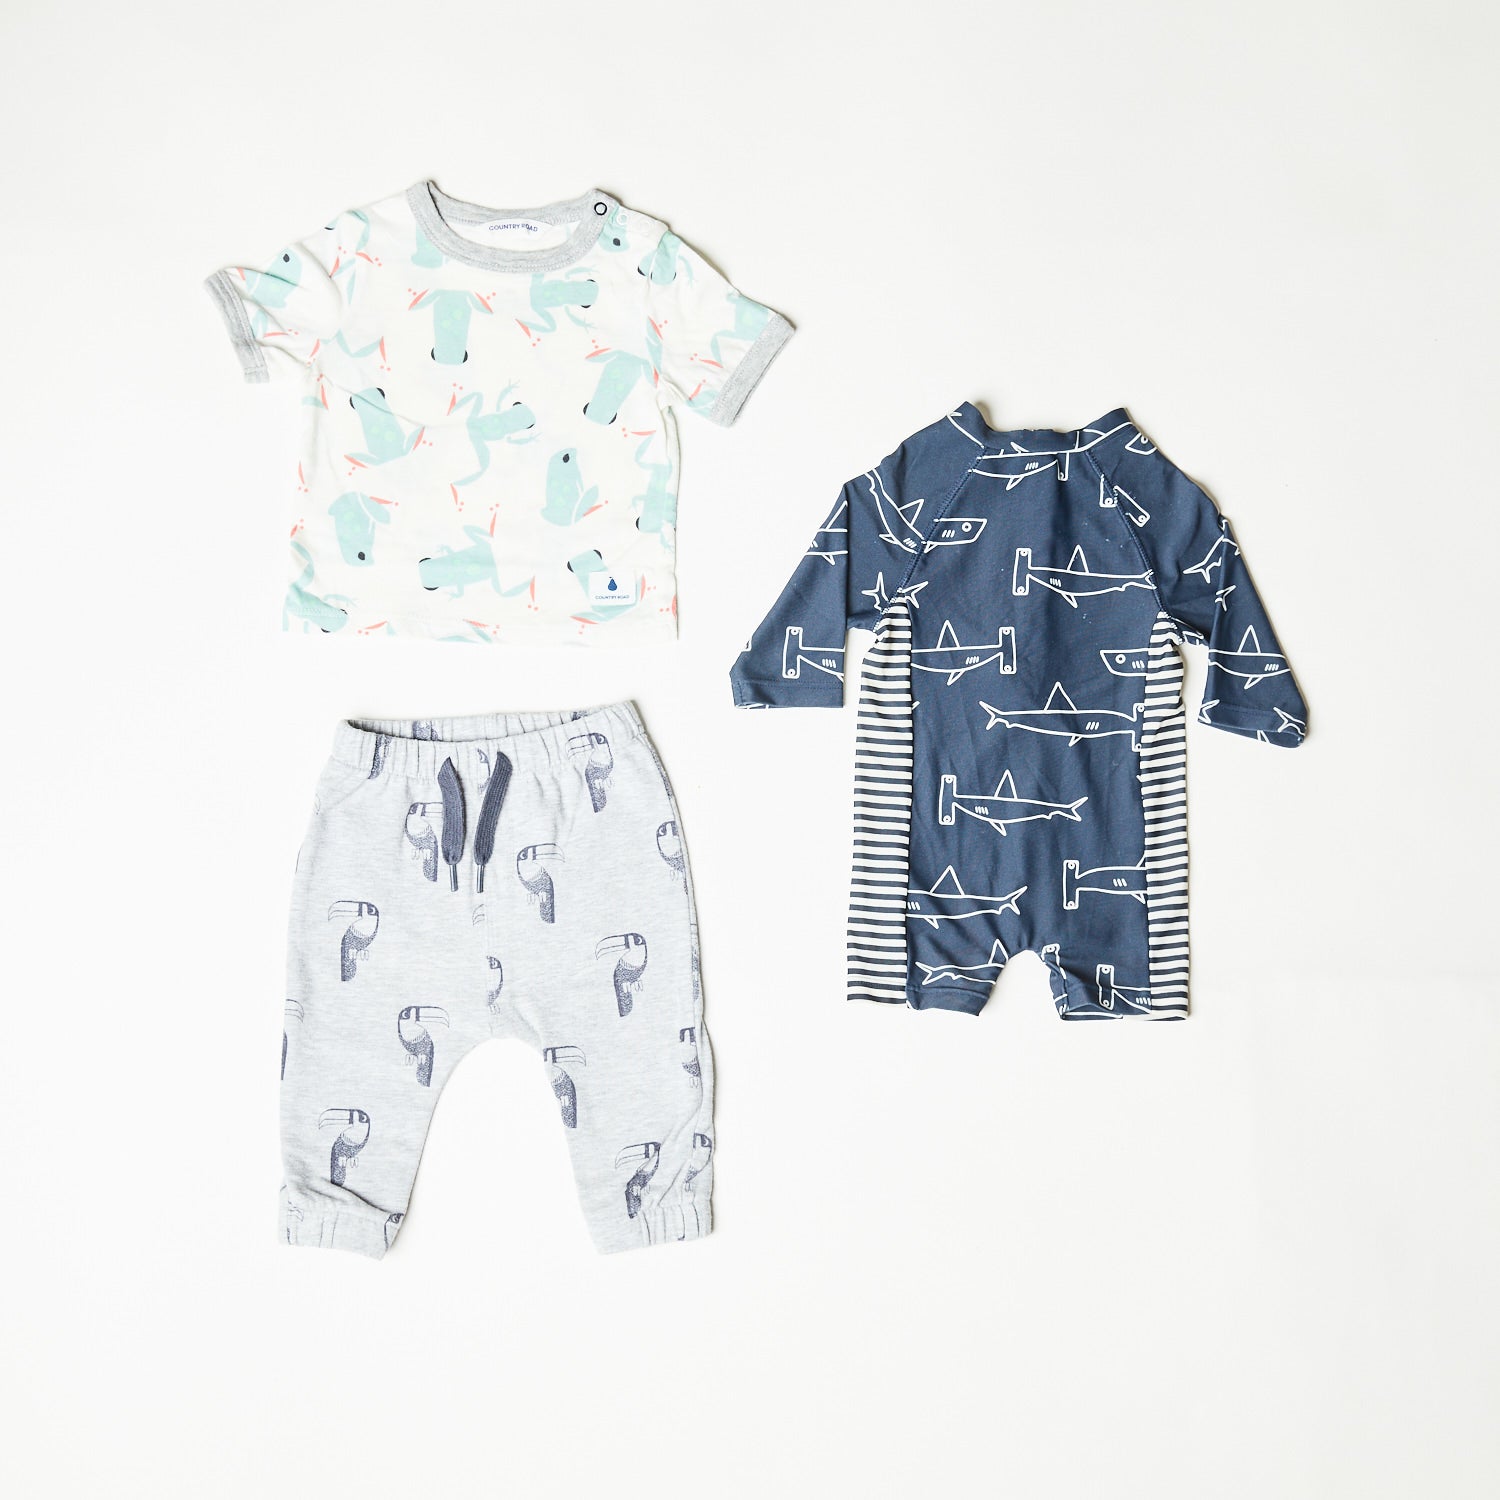 COUNTRY ROAD 3 PIECE BUNDLE, 0-3 MONTHS